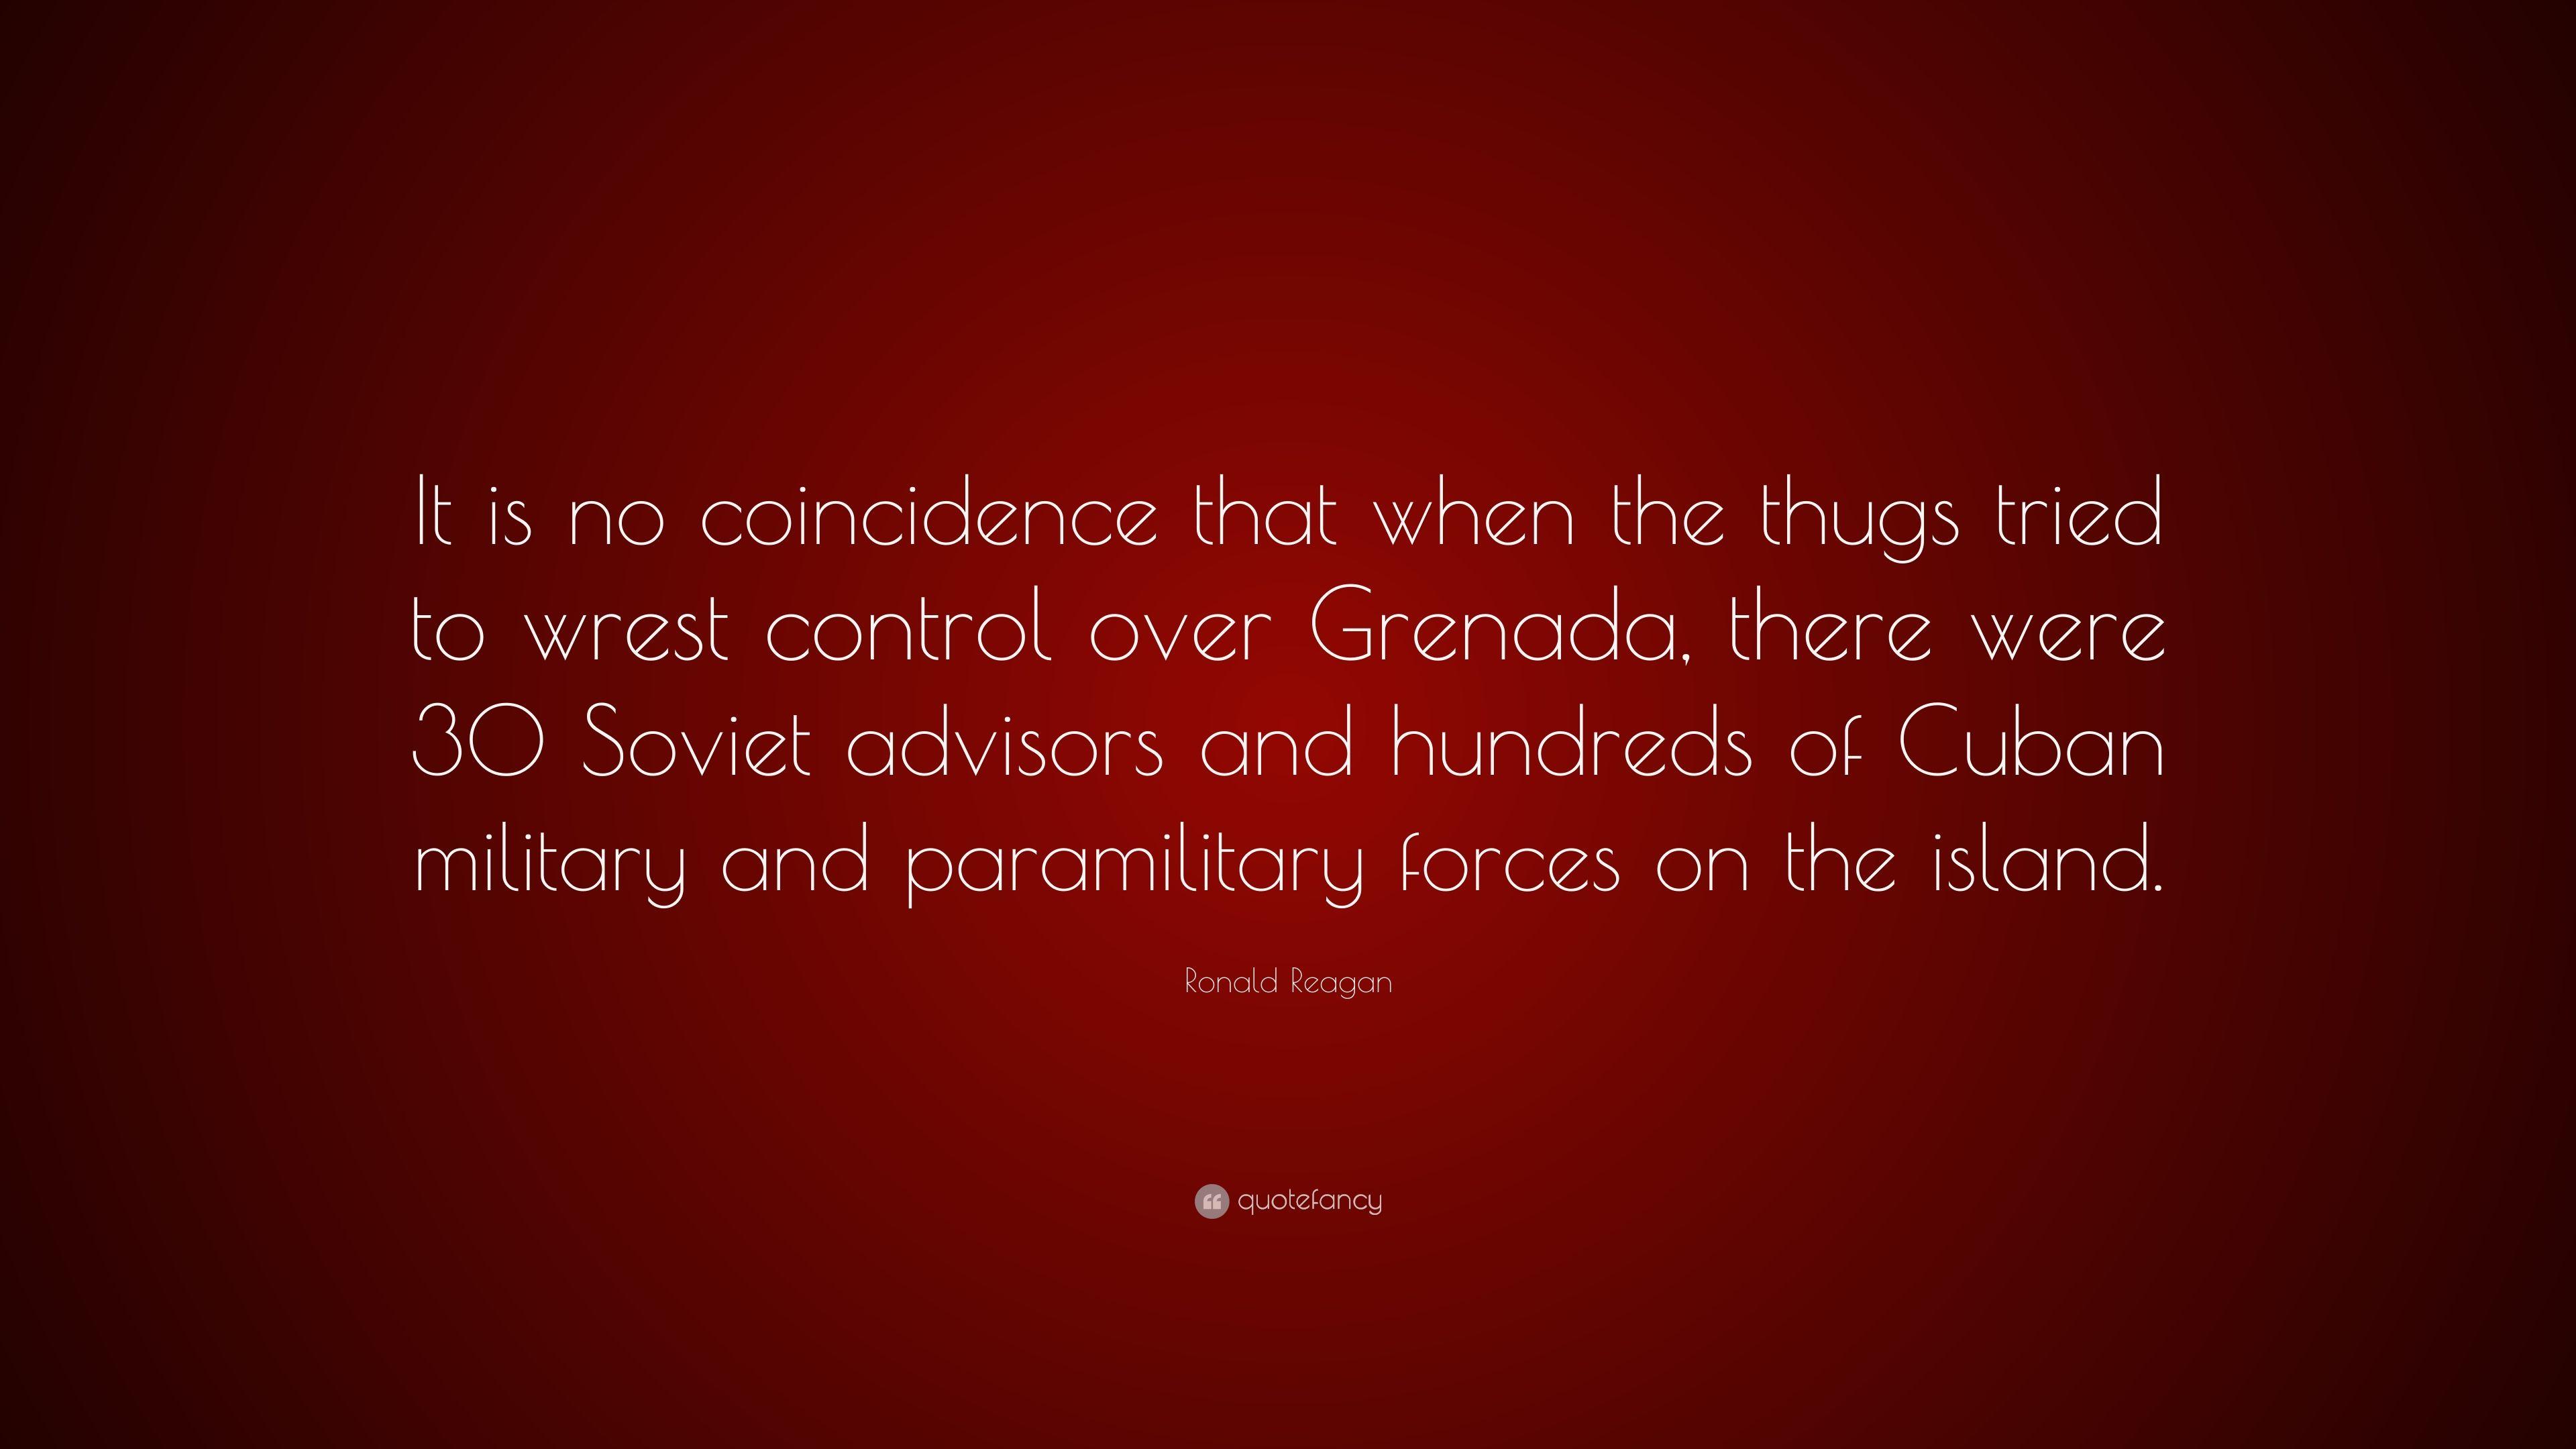 Ronald Reagan Quote: “It is no coincidence that when the thugs tried